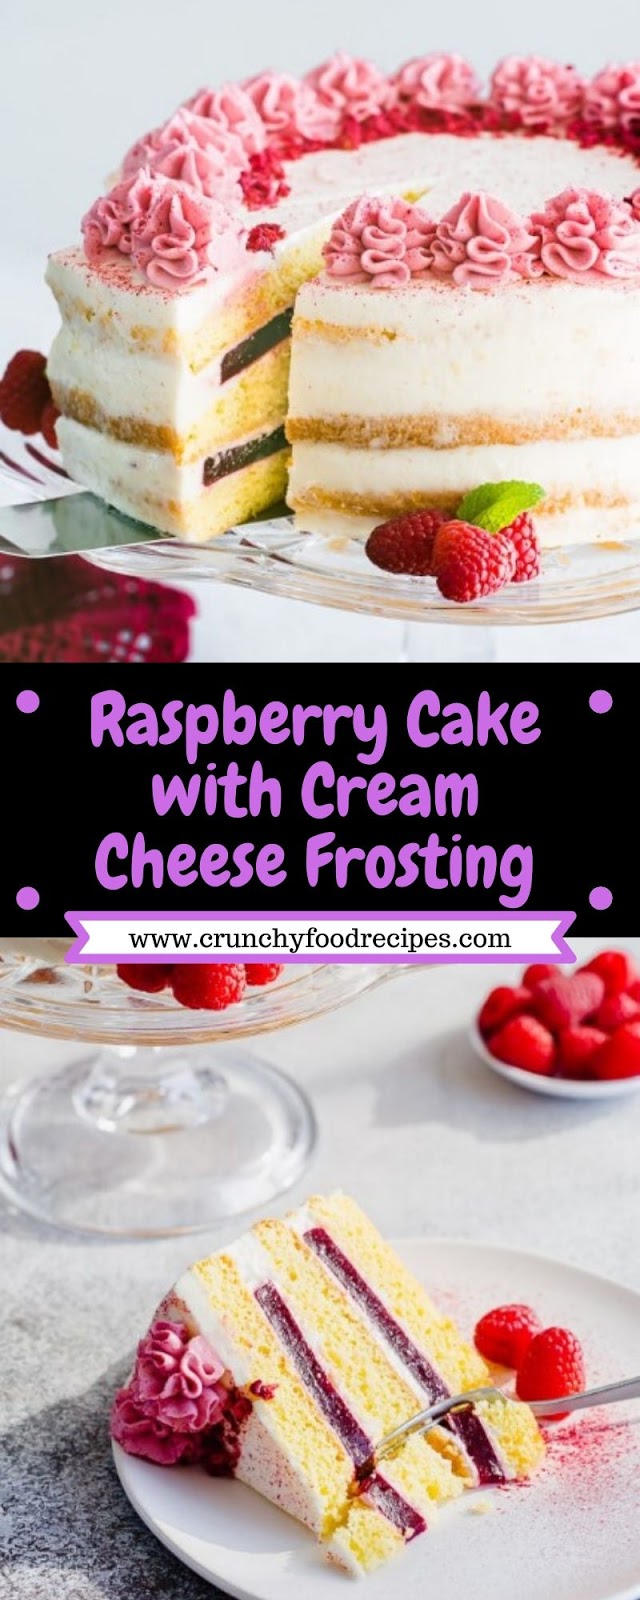 Raspberry Cake with Cream Cheese Frosting